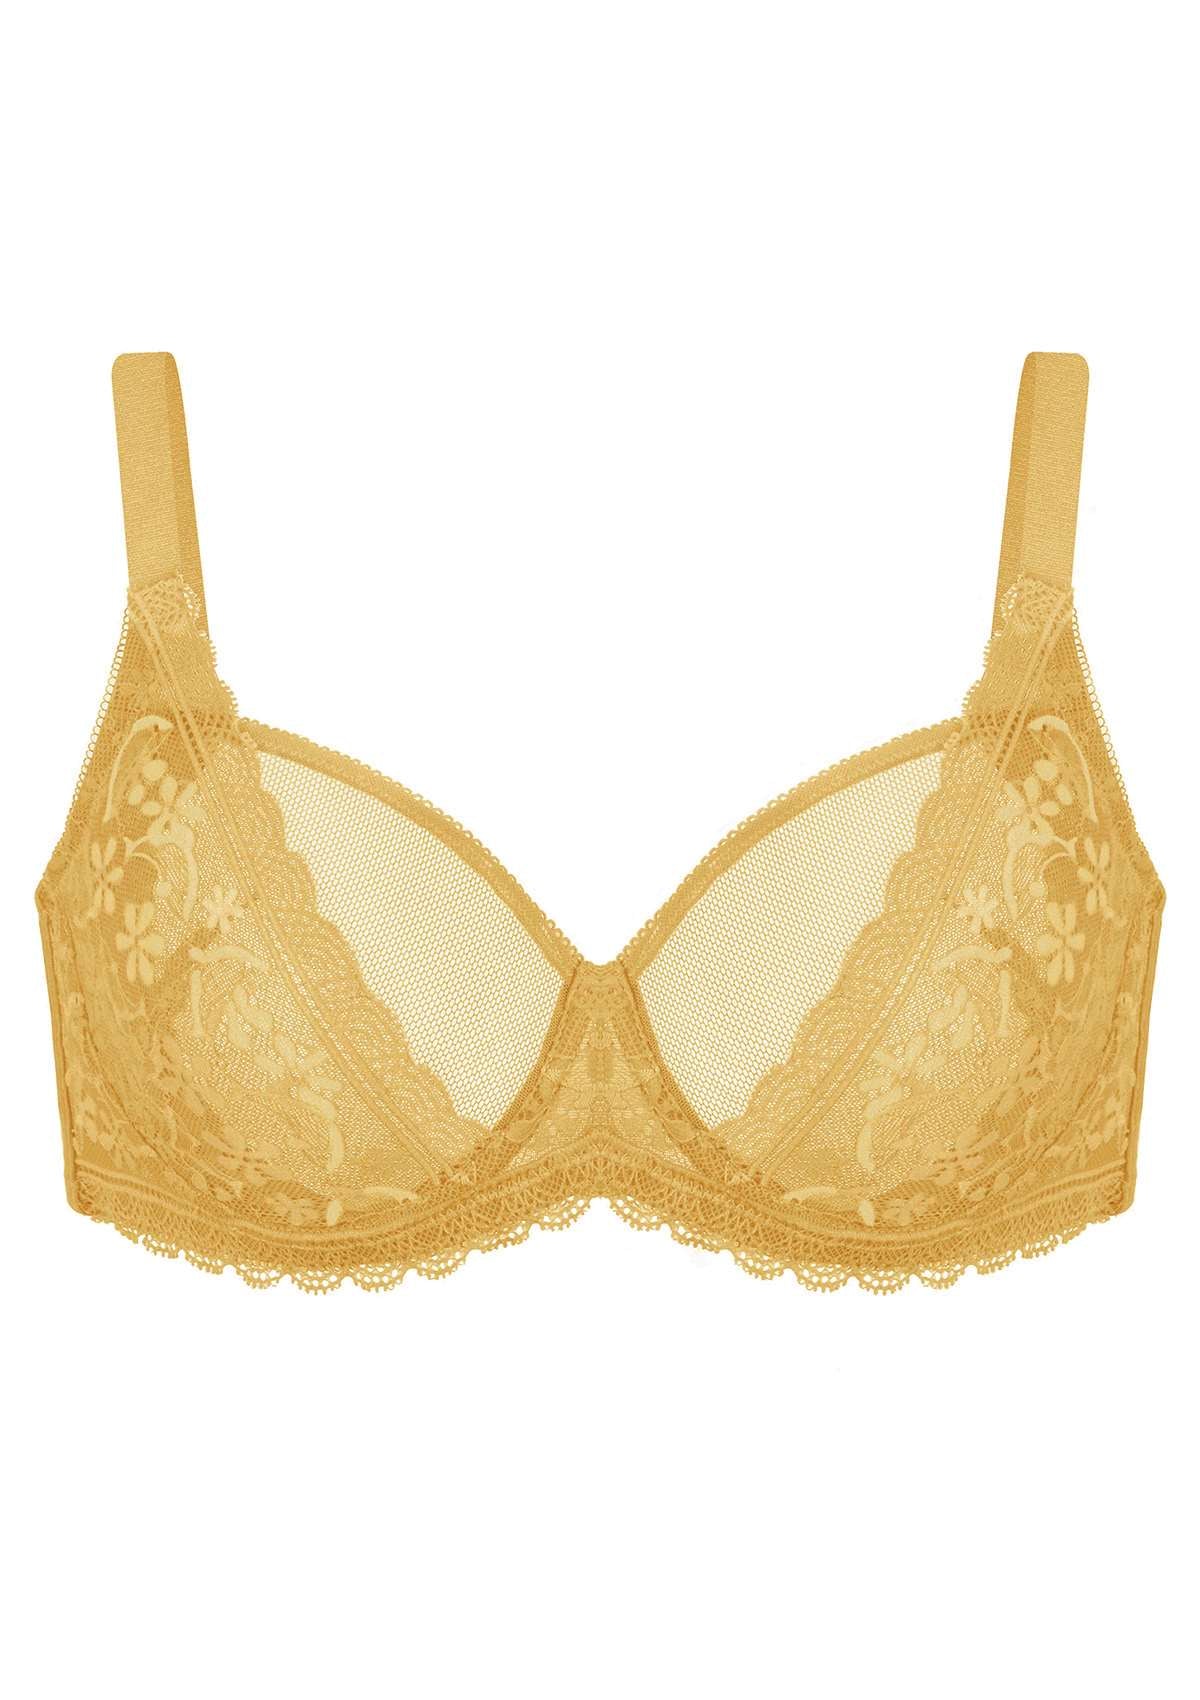 HSIA Anemone Lace Unlined Bra: Supportive, Lightweight Bra - Champagne / 38 / D